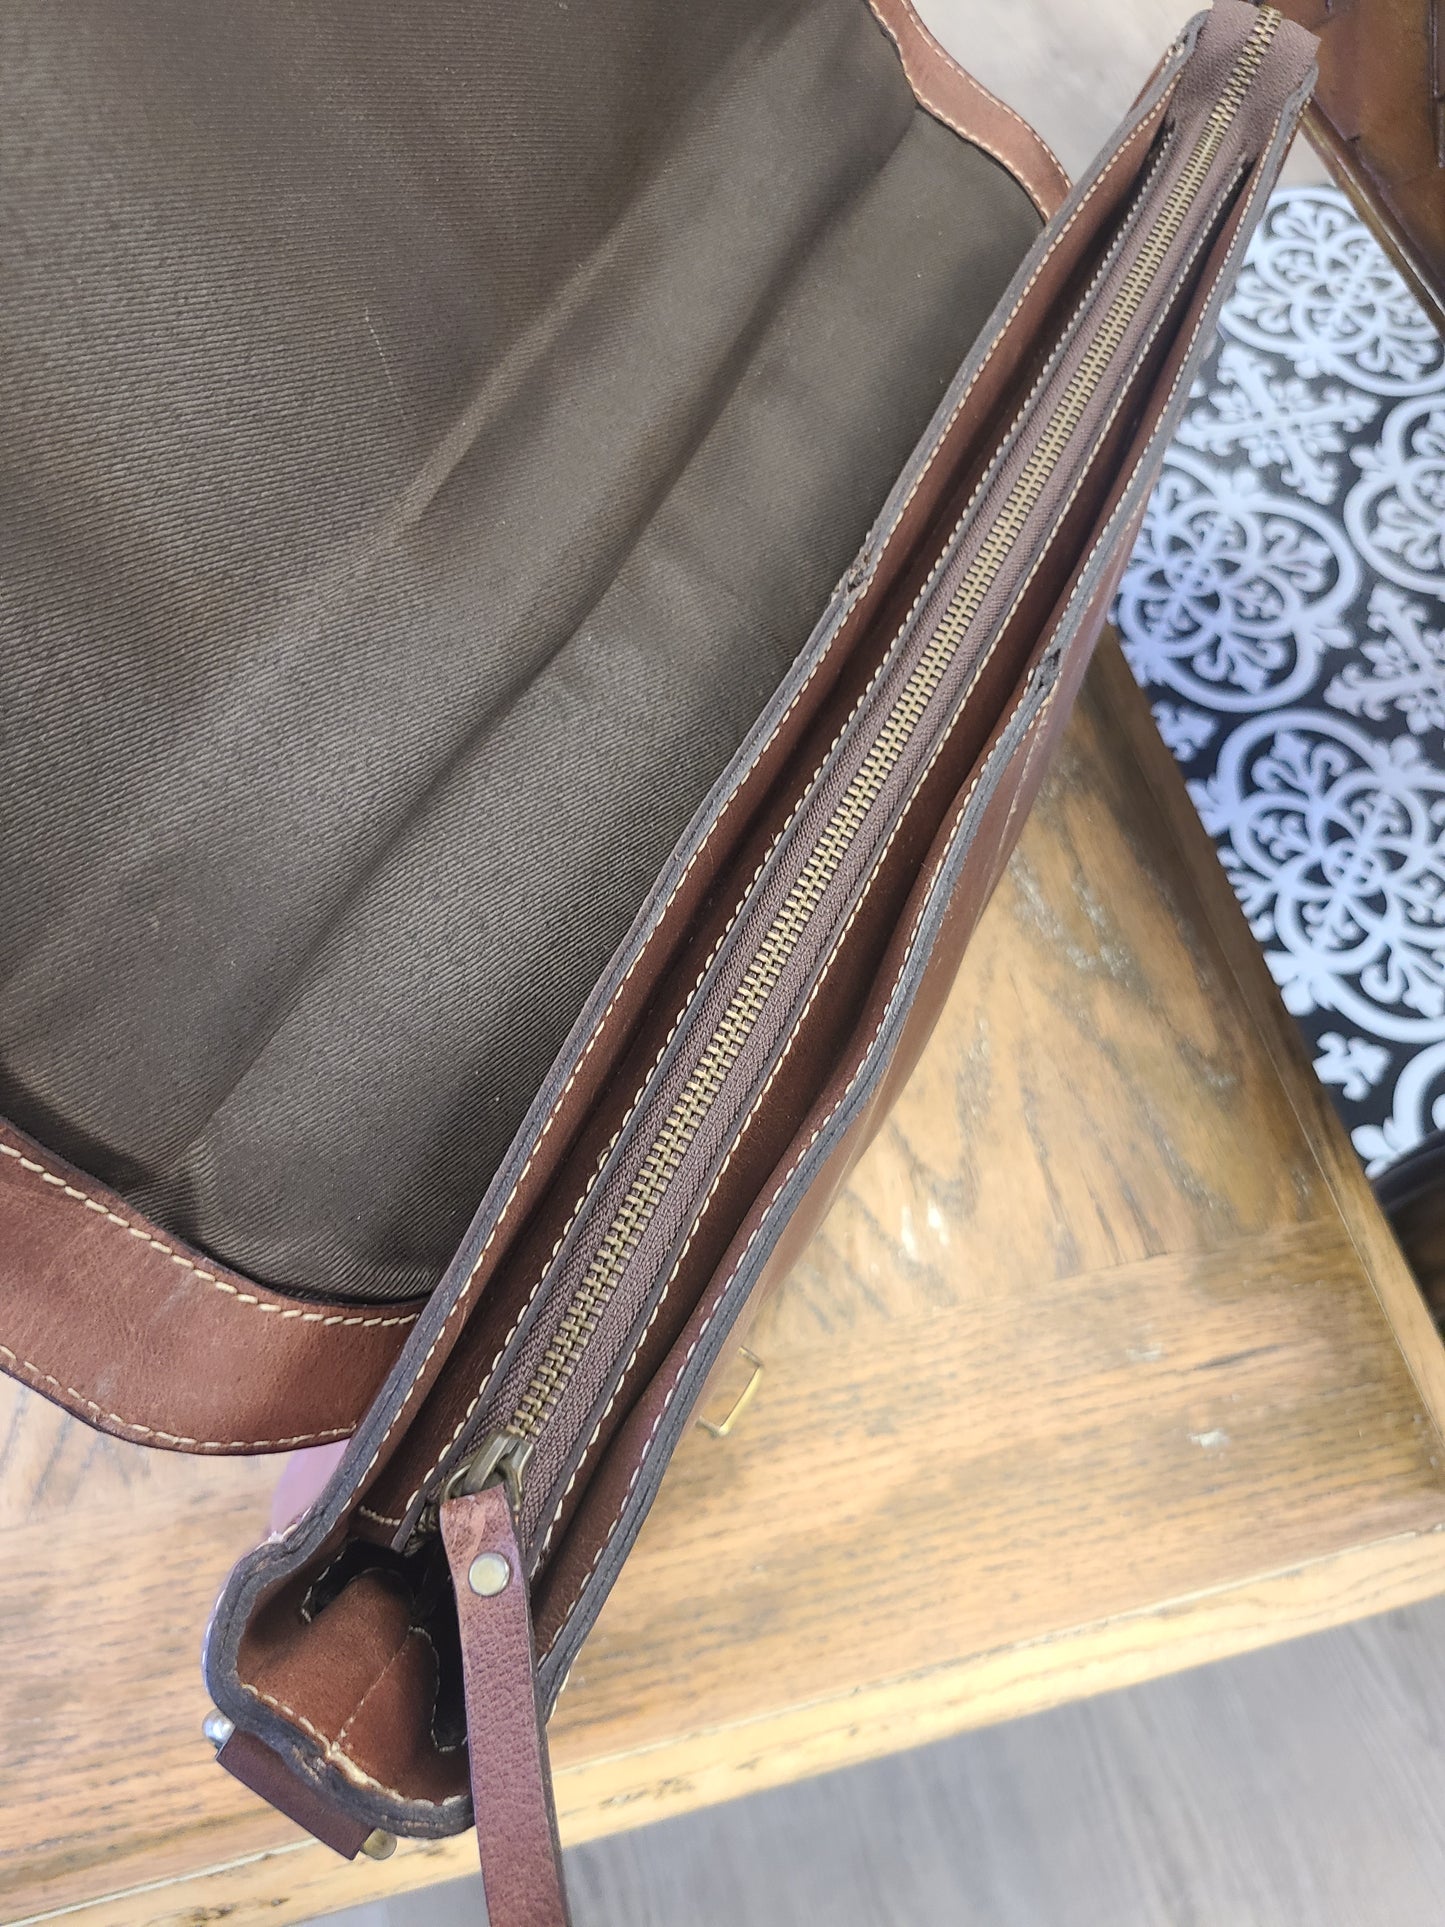 Classic Leather Stitched Messenger Bag-Status Co. Leather Studio